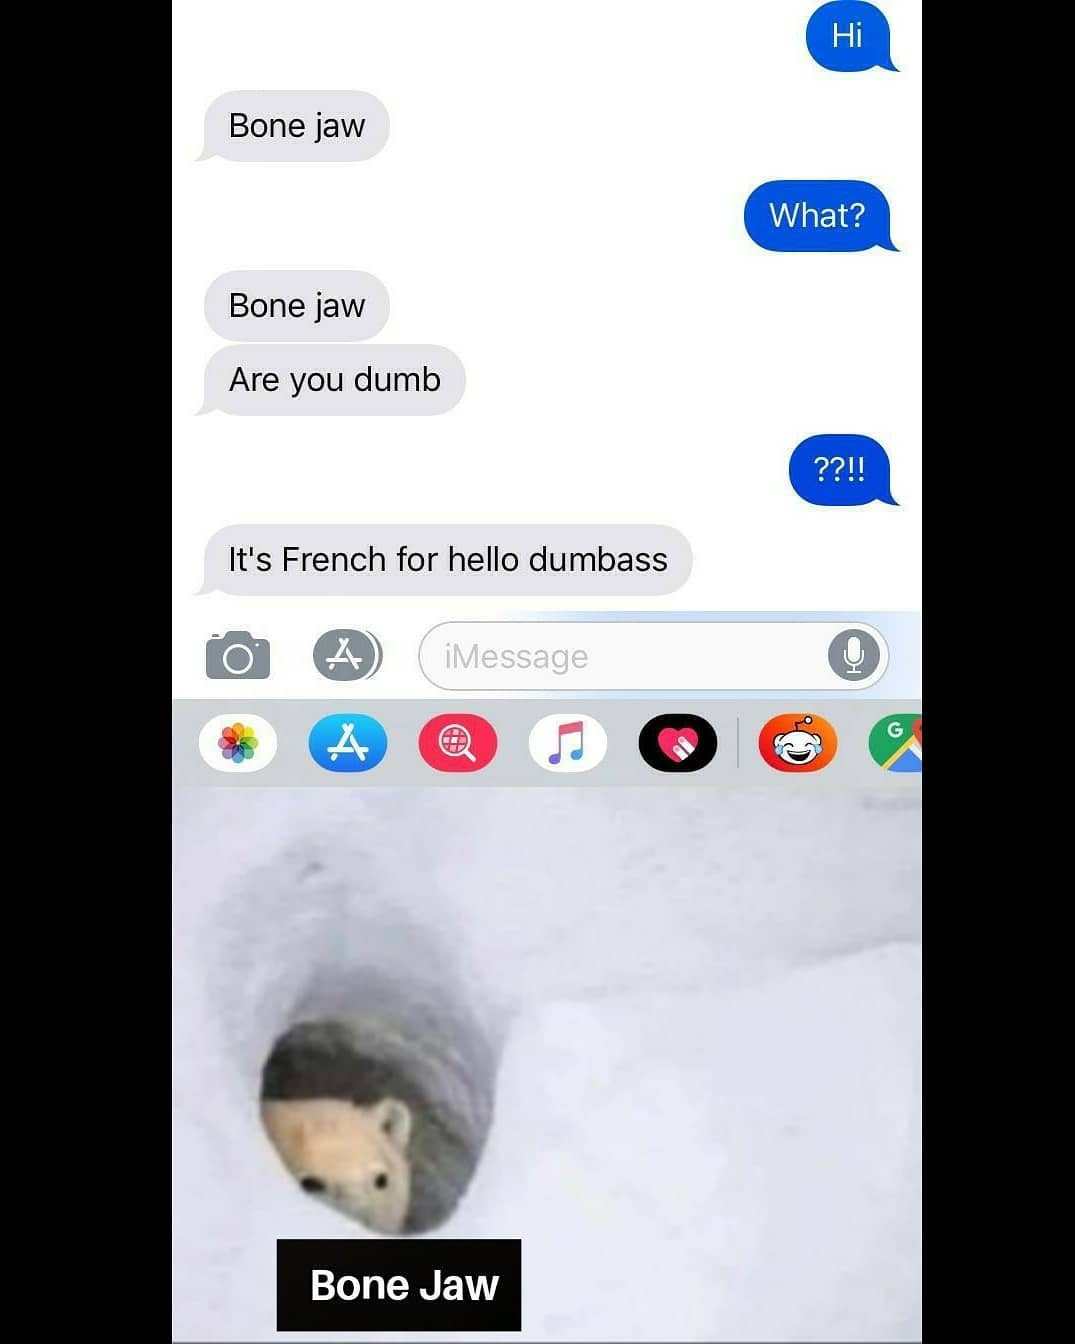 dank memes - love mobile texts - Hi Bone jaw What? Bone jaw Are you dumb ??!! It's French for hello dumbass A iMessage G A 2 Bone Jaw